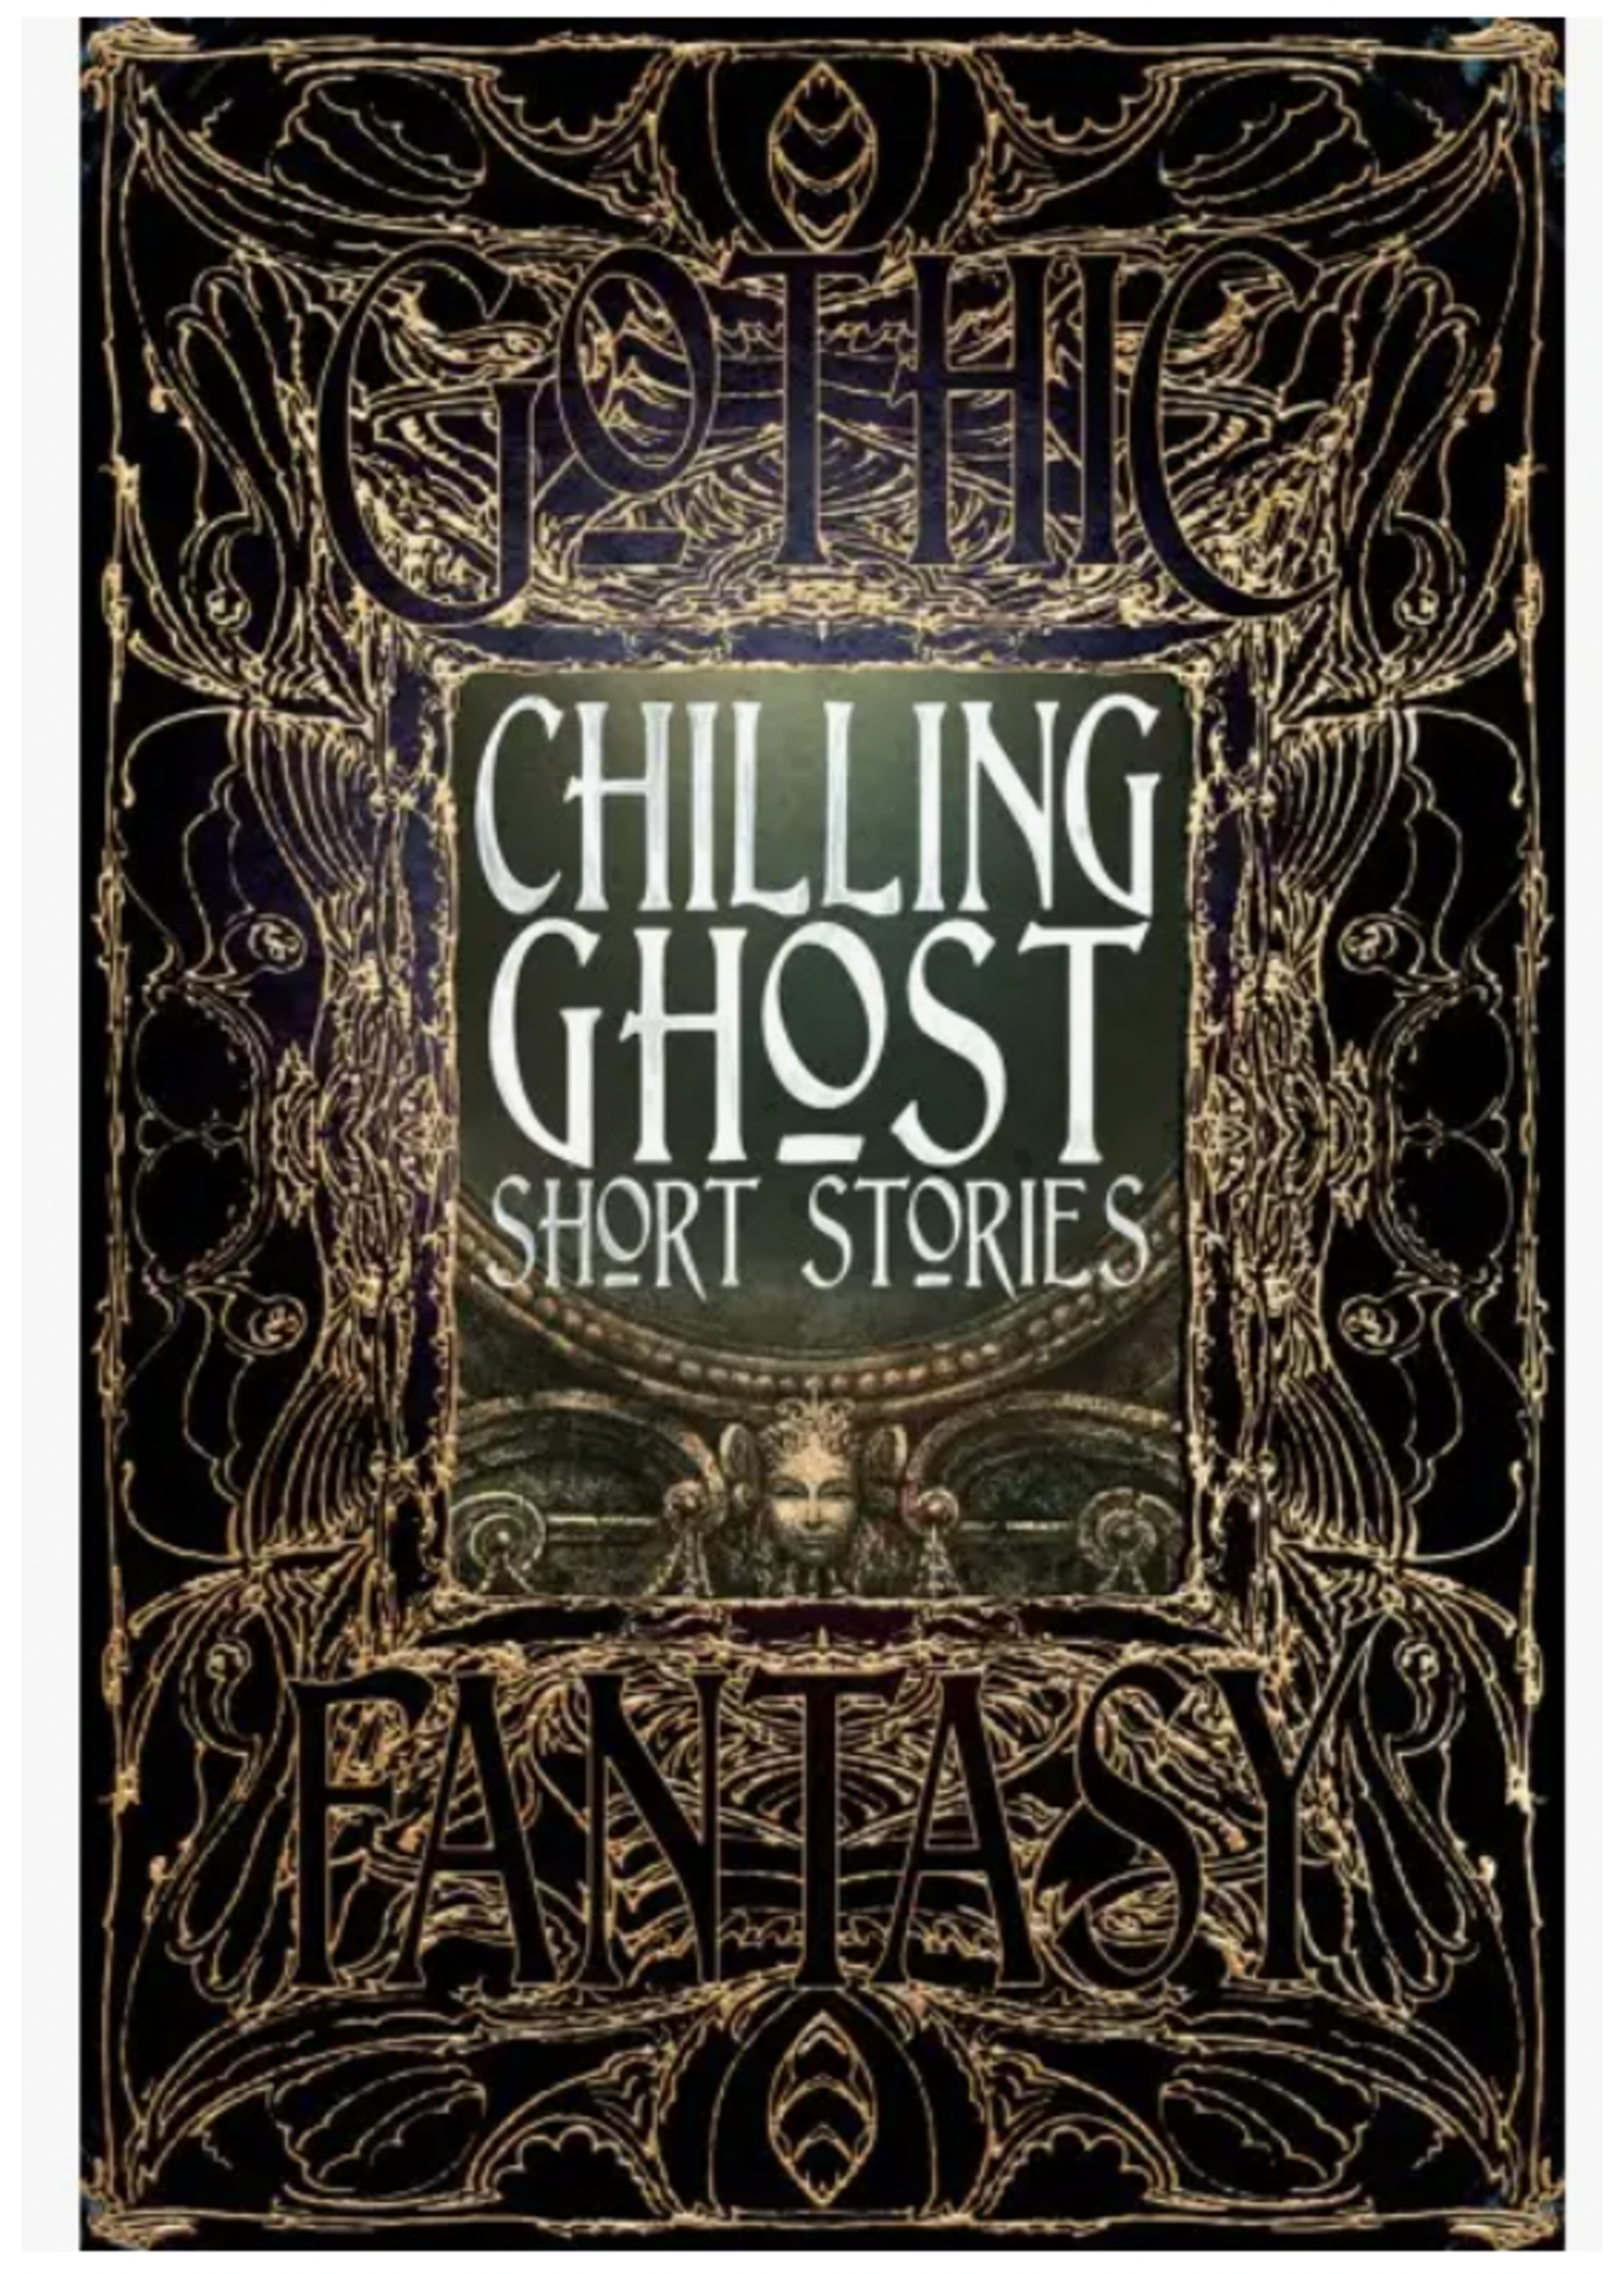 Texas Bookman Chilling Ghost Stories Gothic Fantasy